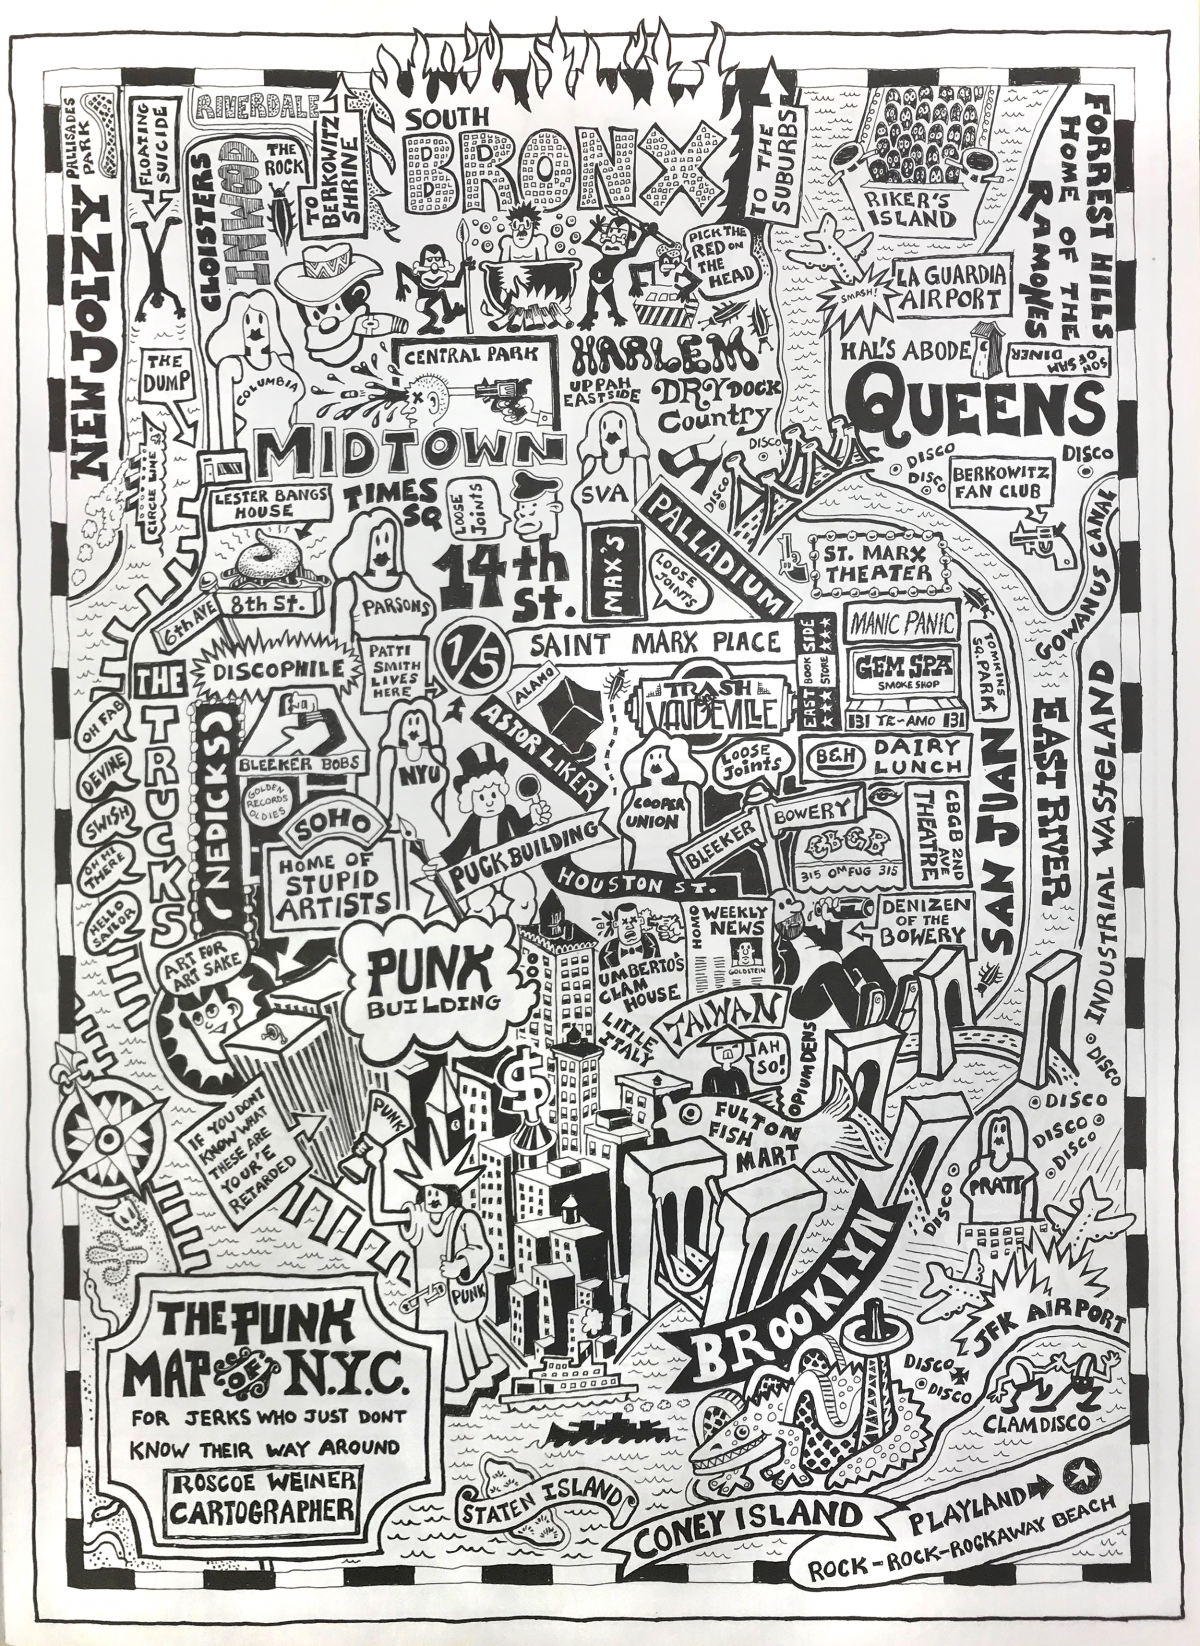 The Punk Map of NYC: For Jerks Who Just Don't Know Their Way Around. Roscoe Weiner, Cartographer